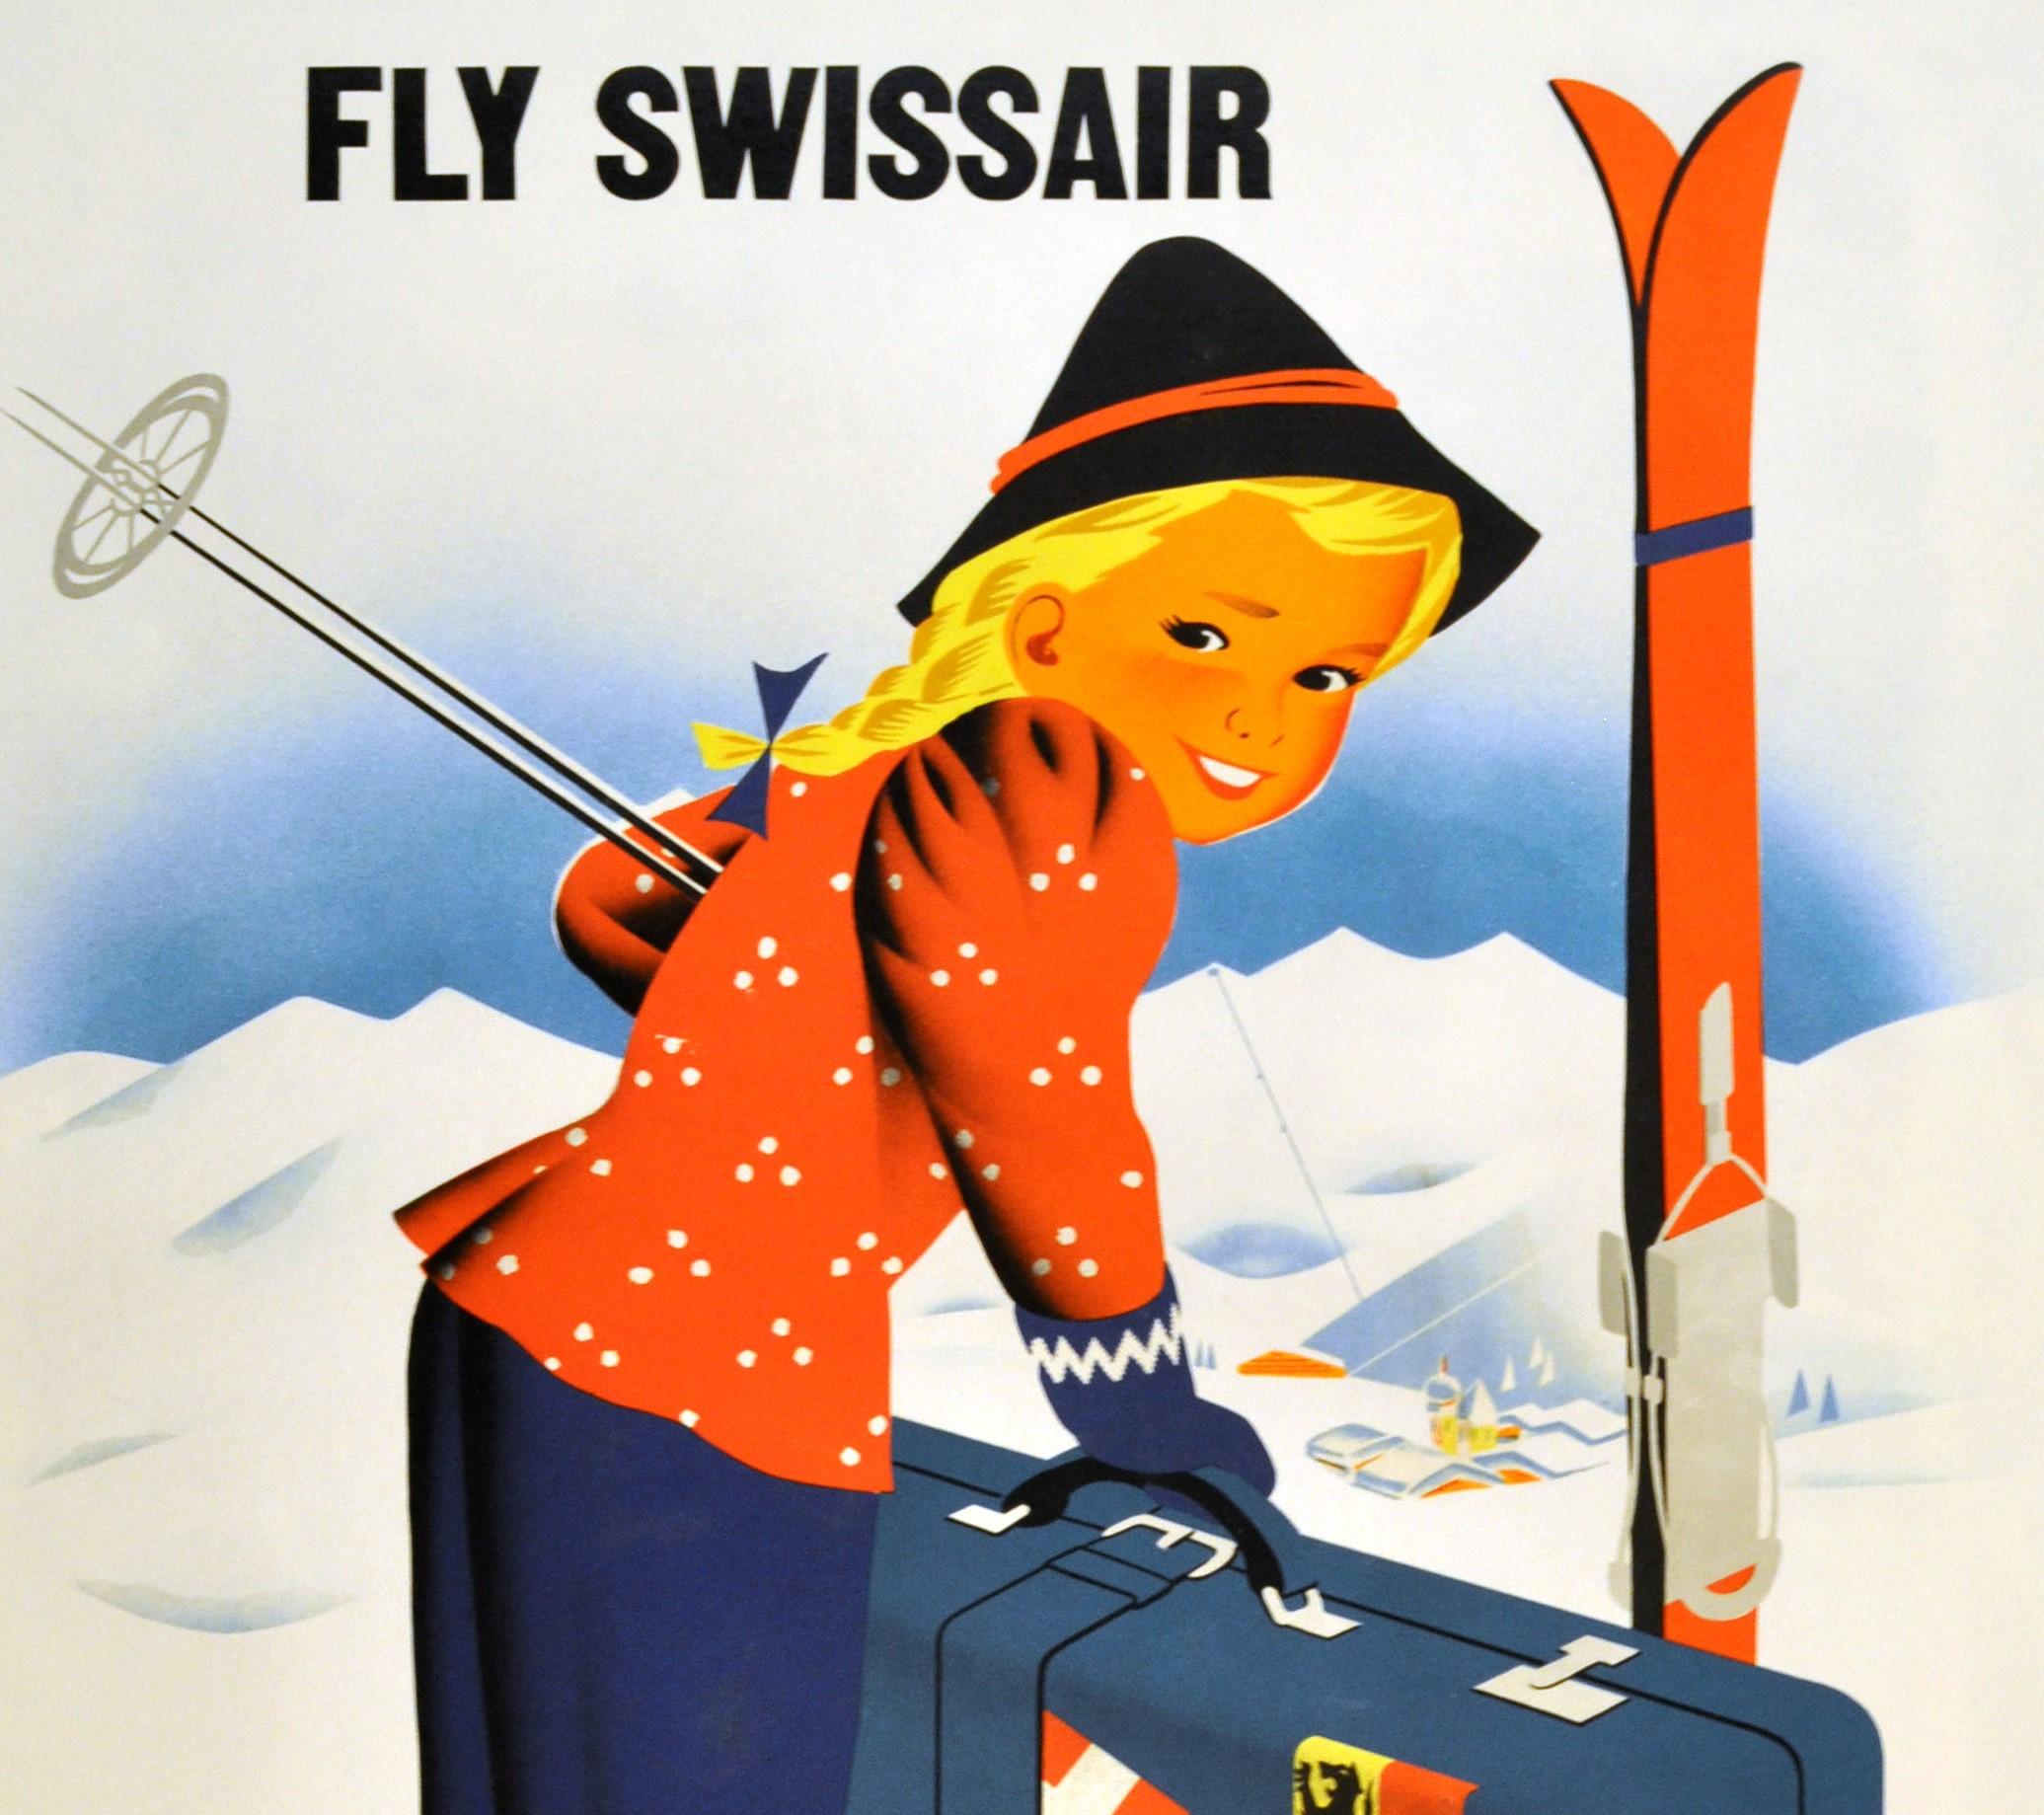 Original vintage skiing and winter sports travel poster - Fly Swissair Winter in Austria - featuring great artwork of a traditionally dressed young girl smiling to the viewer whilst holding her ski poles and suitcase covered with stickers of